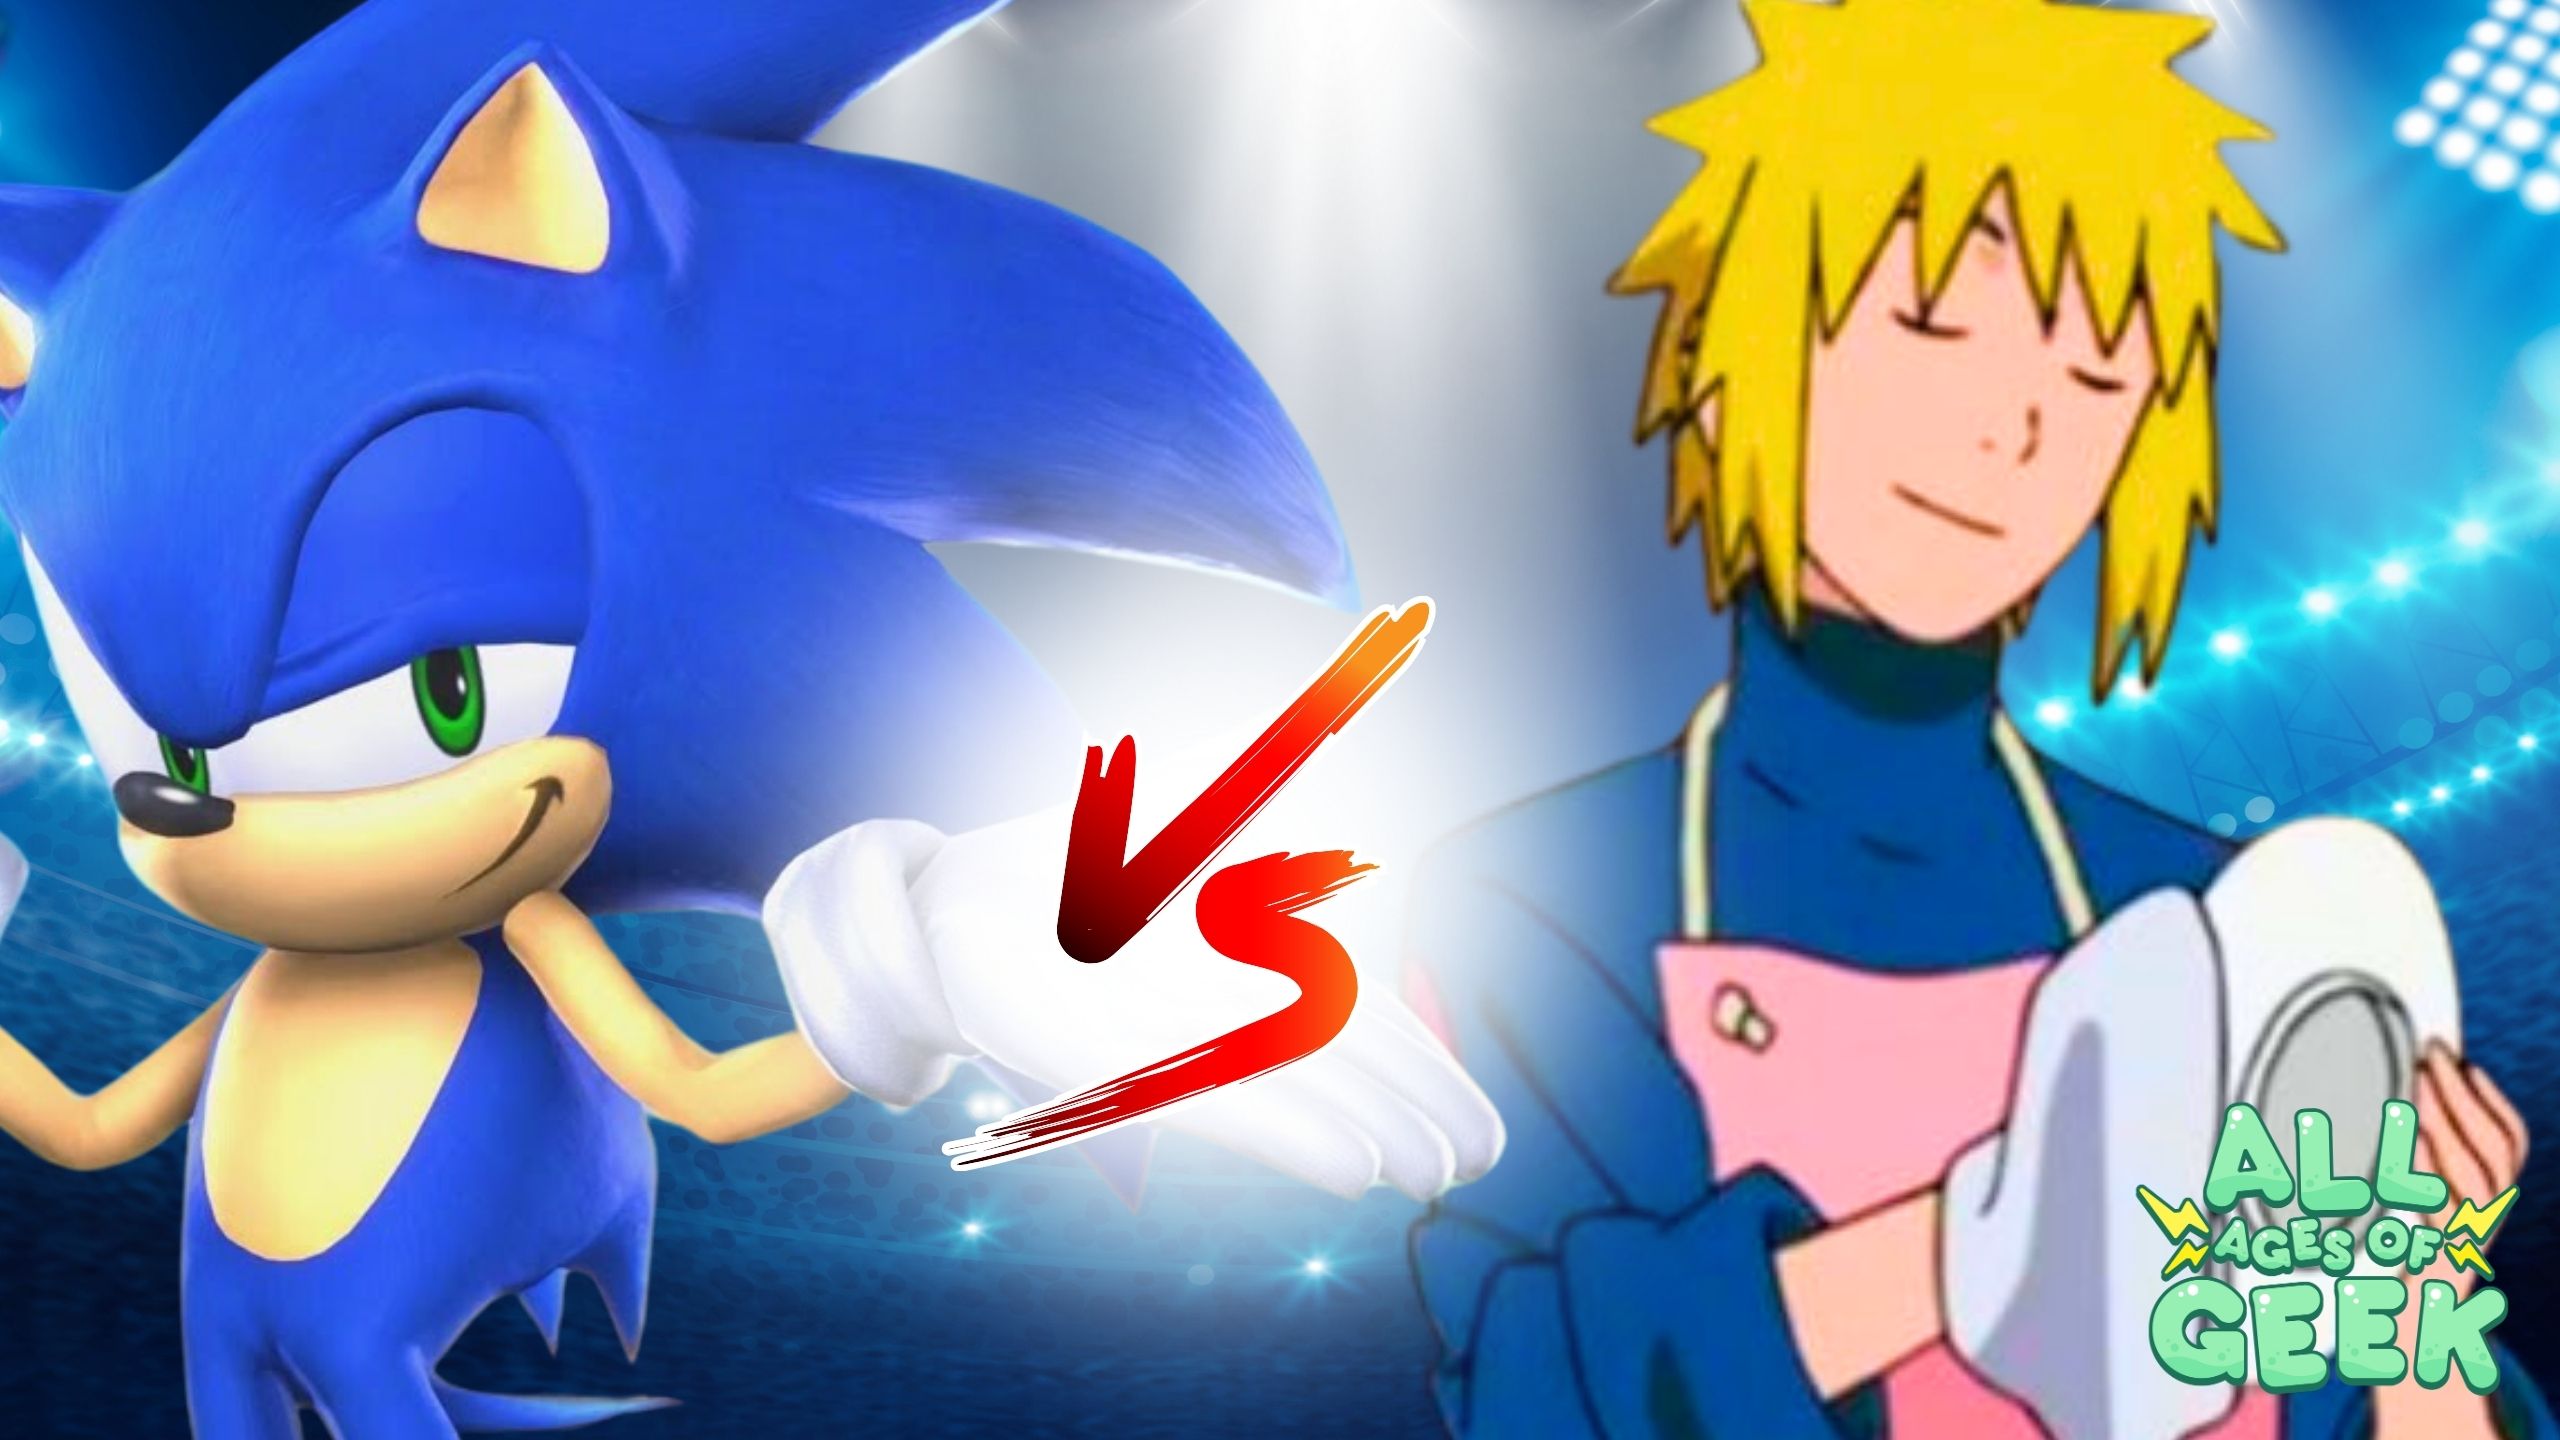 A dynamic versus image featuring Sonic the Hedgehog on the left and Minato Namikaze from Naruto on the right. Sonic, with his iconic blue spikes and confident grin, stands ready for action. Minato, wearing a blue ninja outfit and pink apron, is shown calmly drying a plate. The background is a stadium filled with lights, and a bold "VS" is placed in the center. The All Ages of Geek logo is in the bottom right corner.